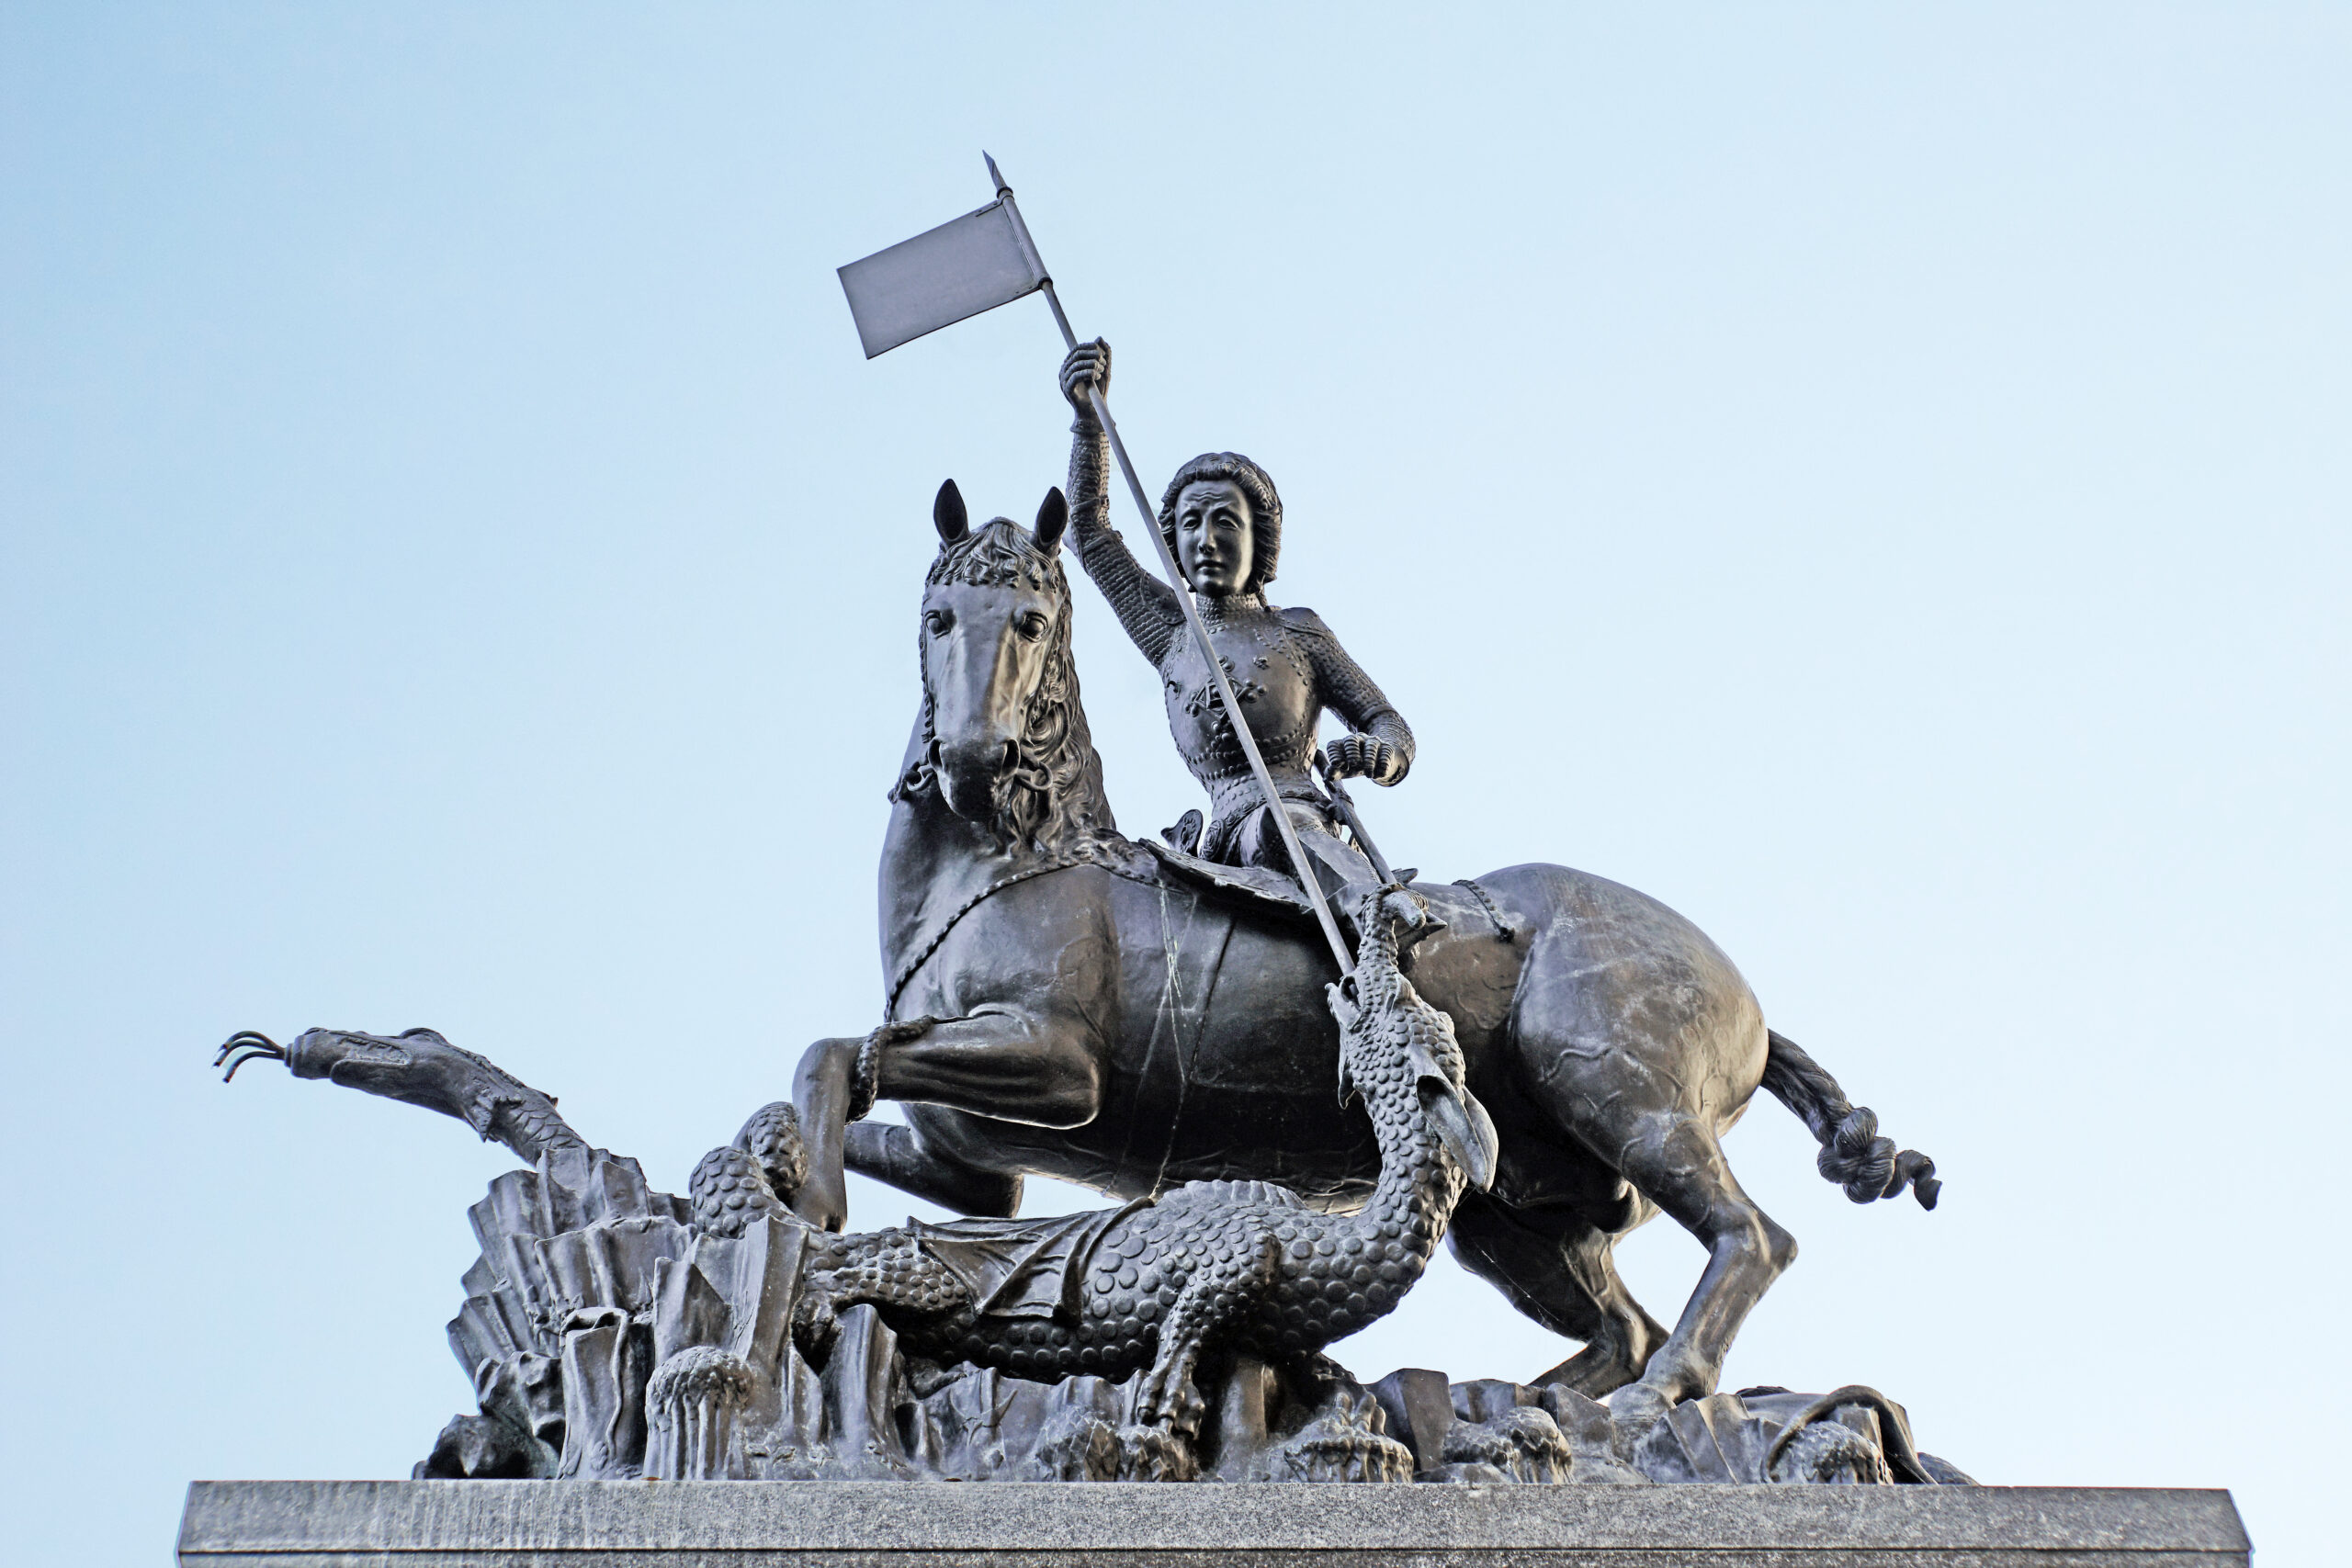 Coming Soon: The statue of Saint George in Prague